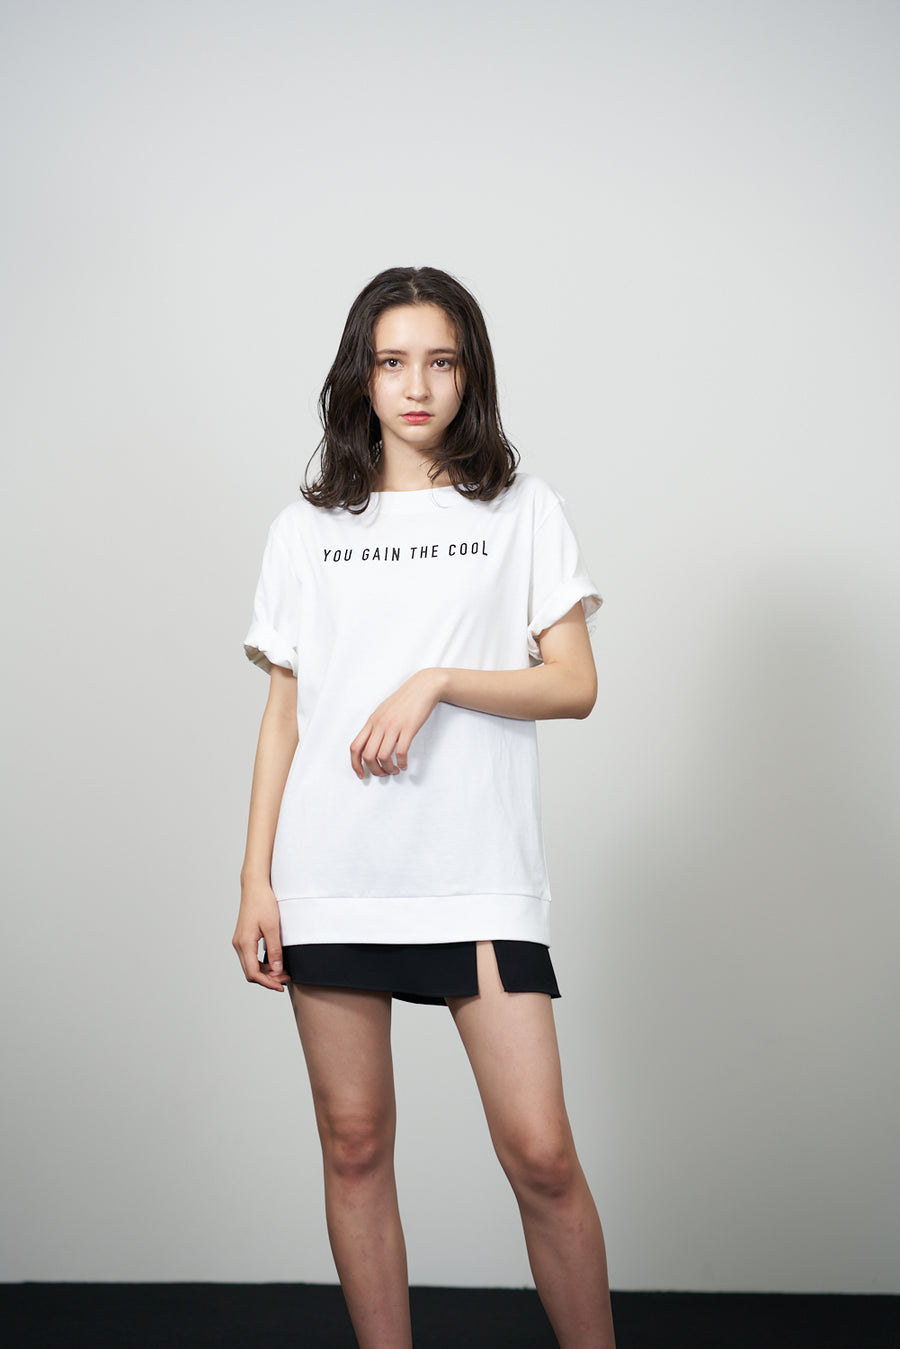 JERSEY BOAT NECK T［YOU GAIN THE COOL］- White